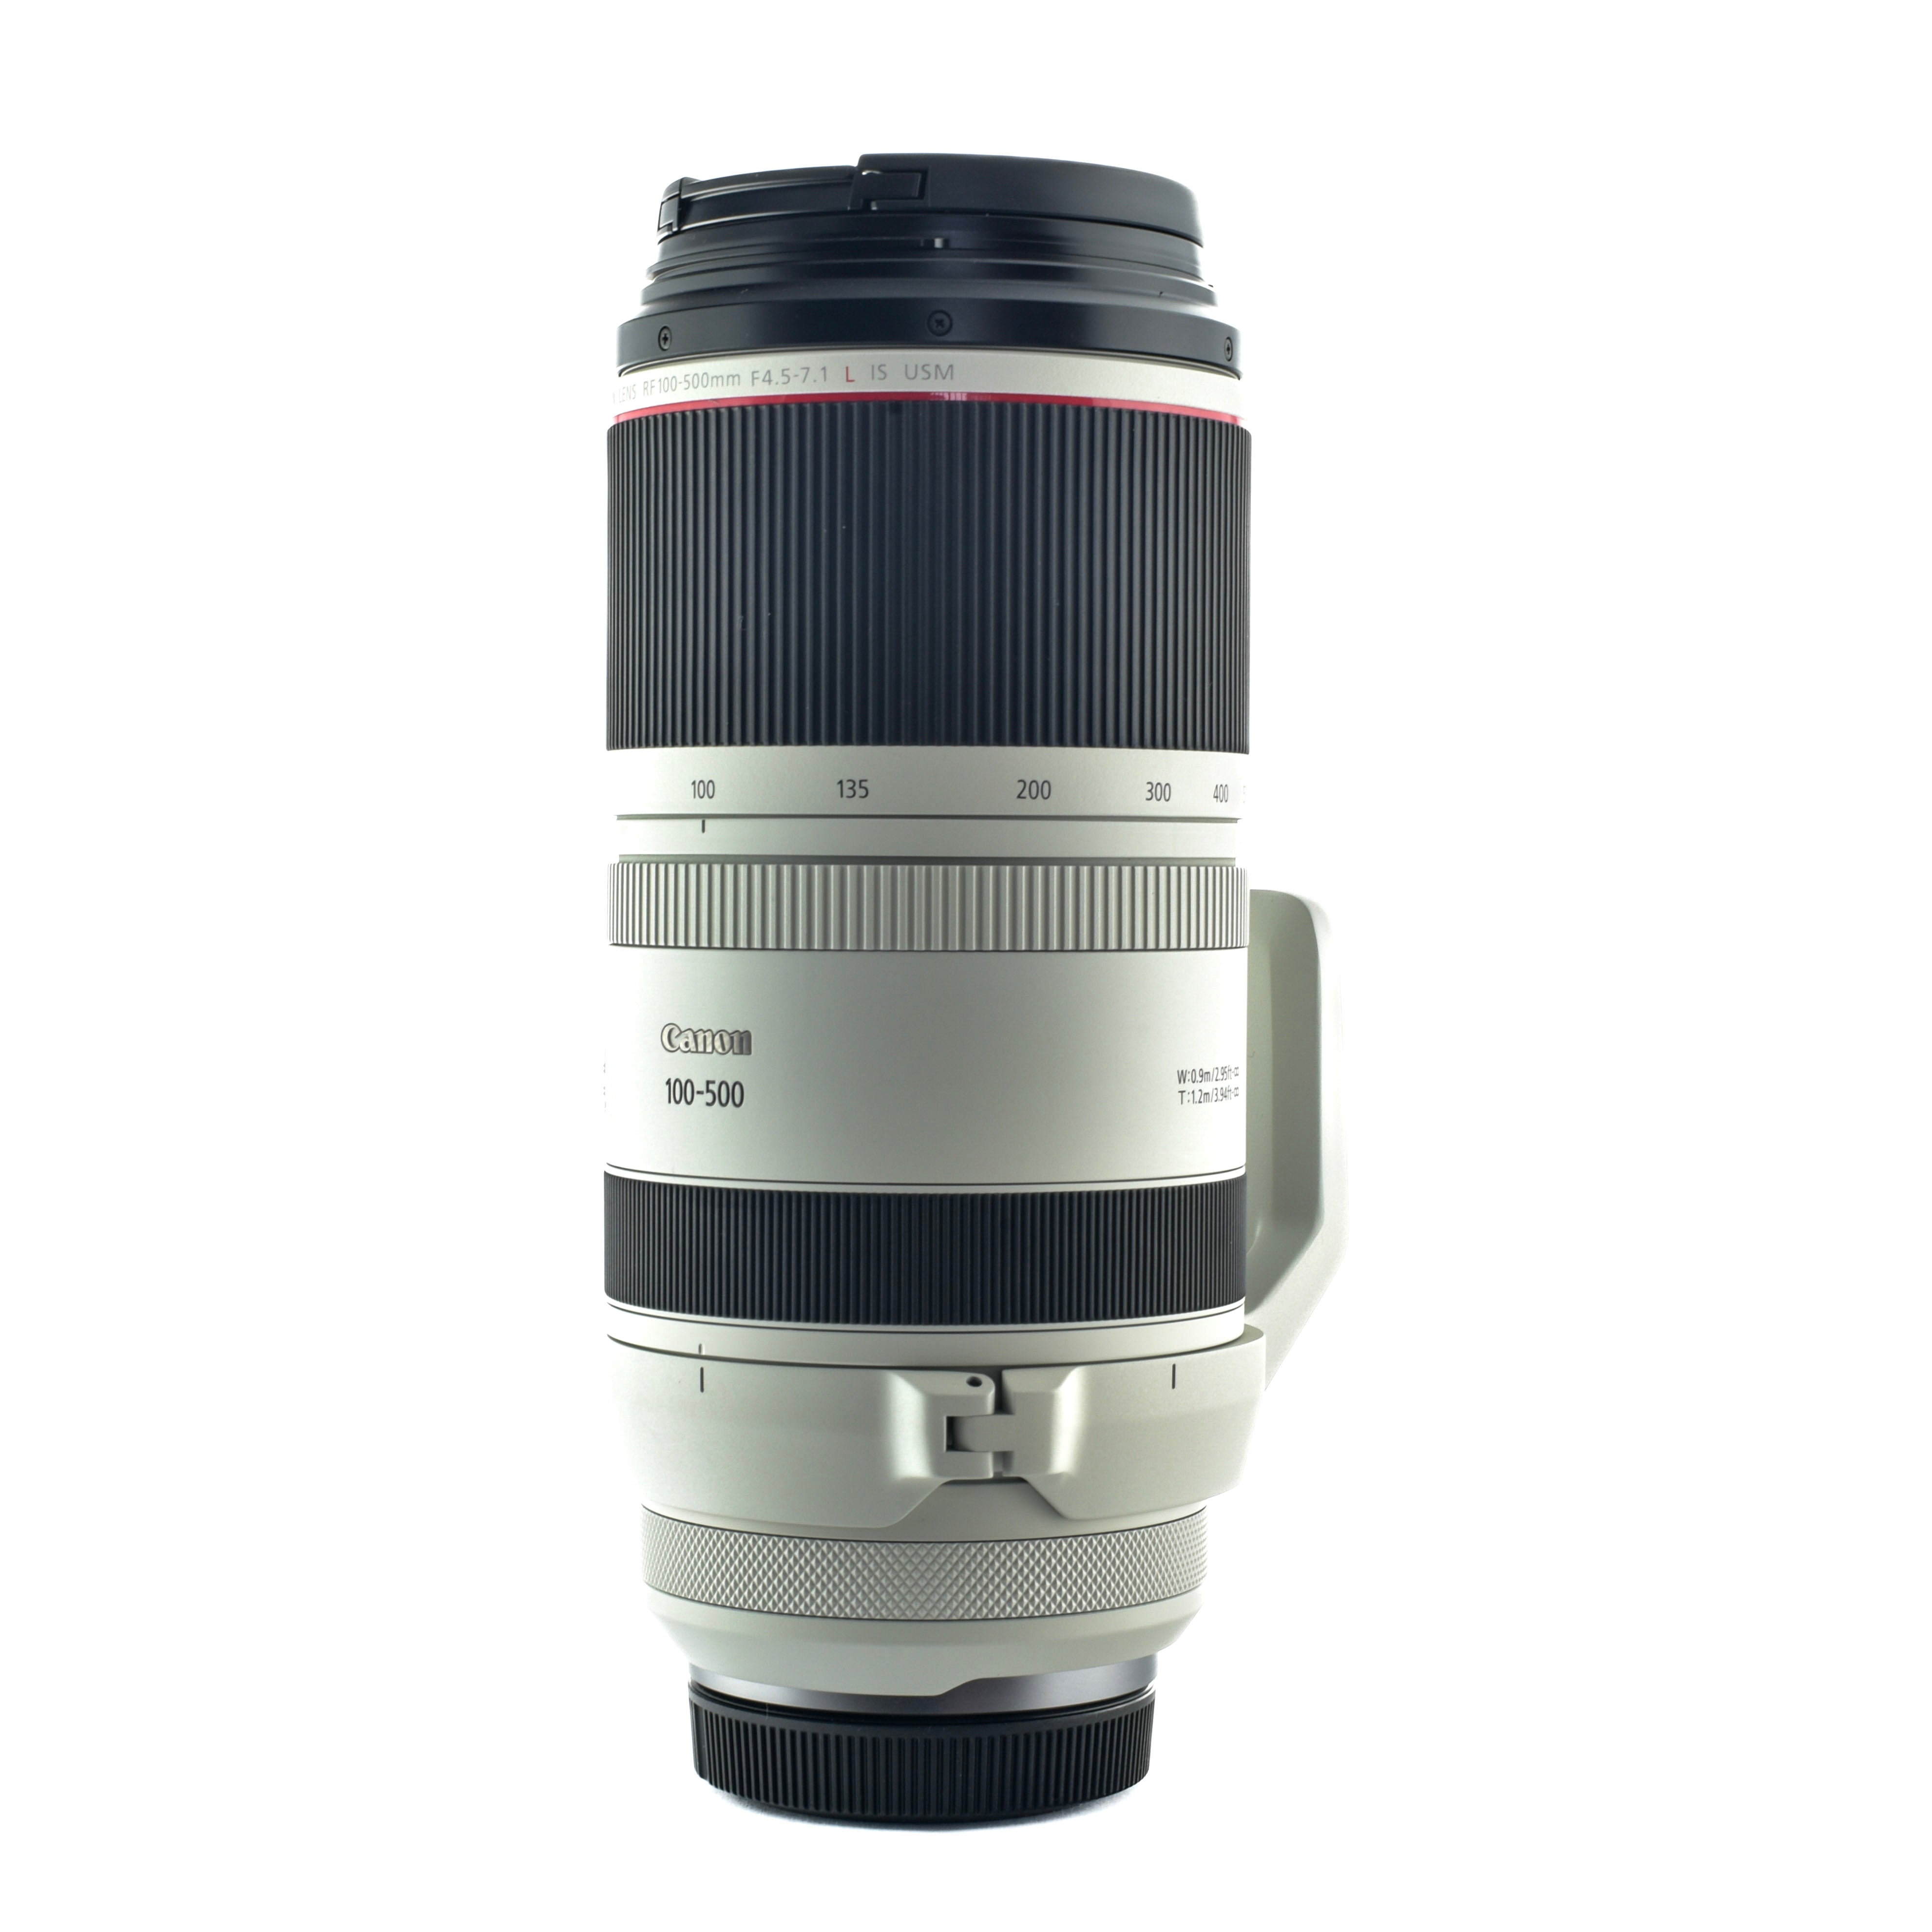 Canon RF 100-500mm f 4.5-7.1L IS USM lens